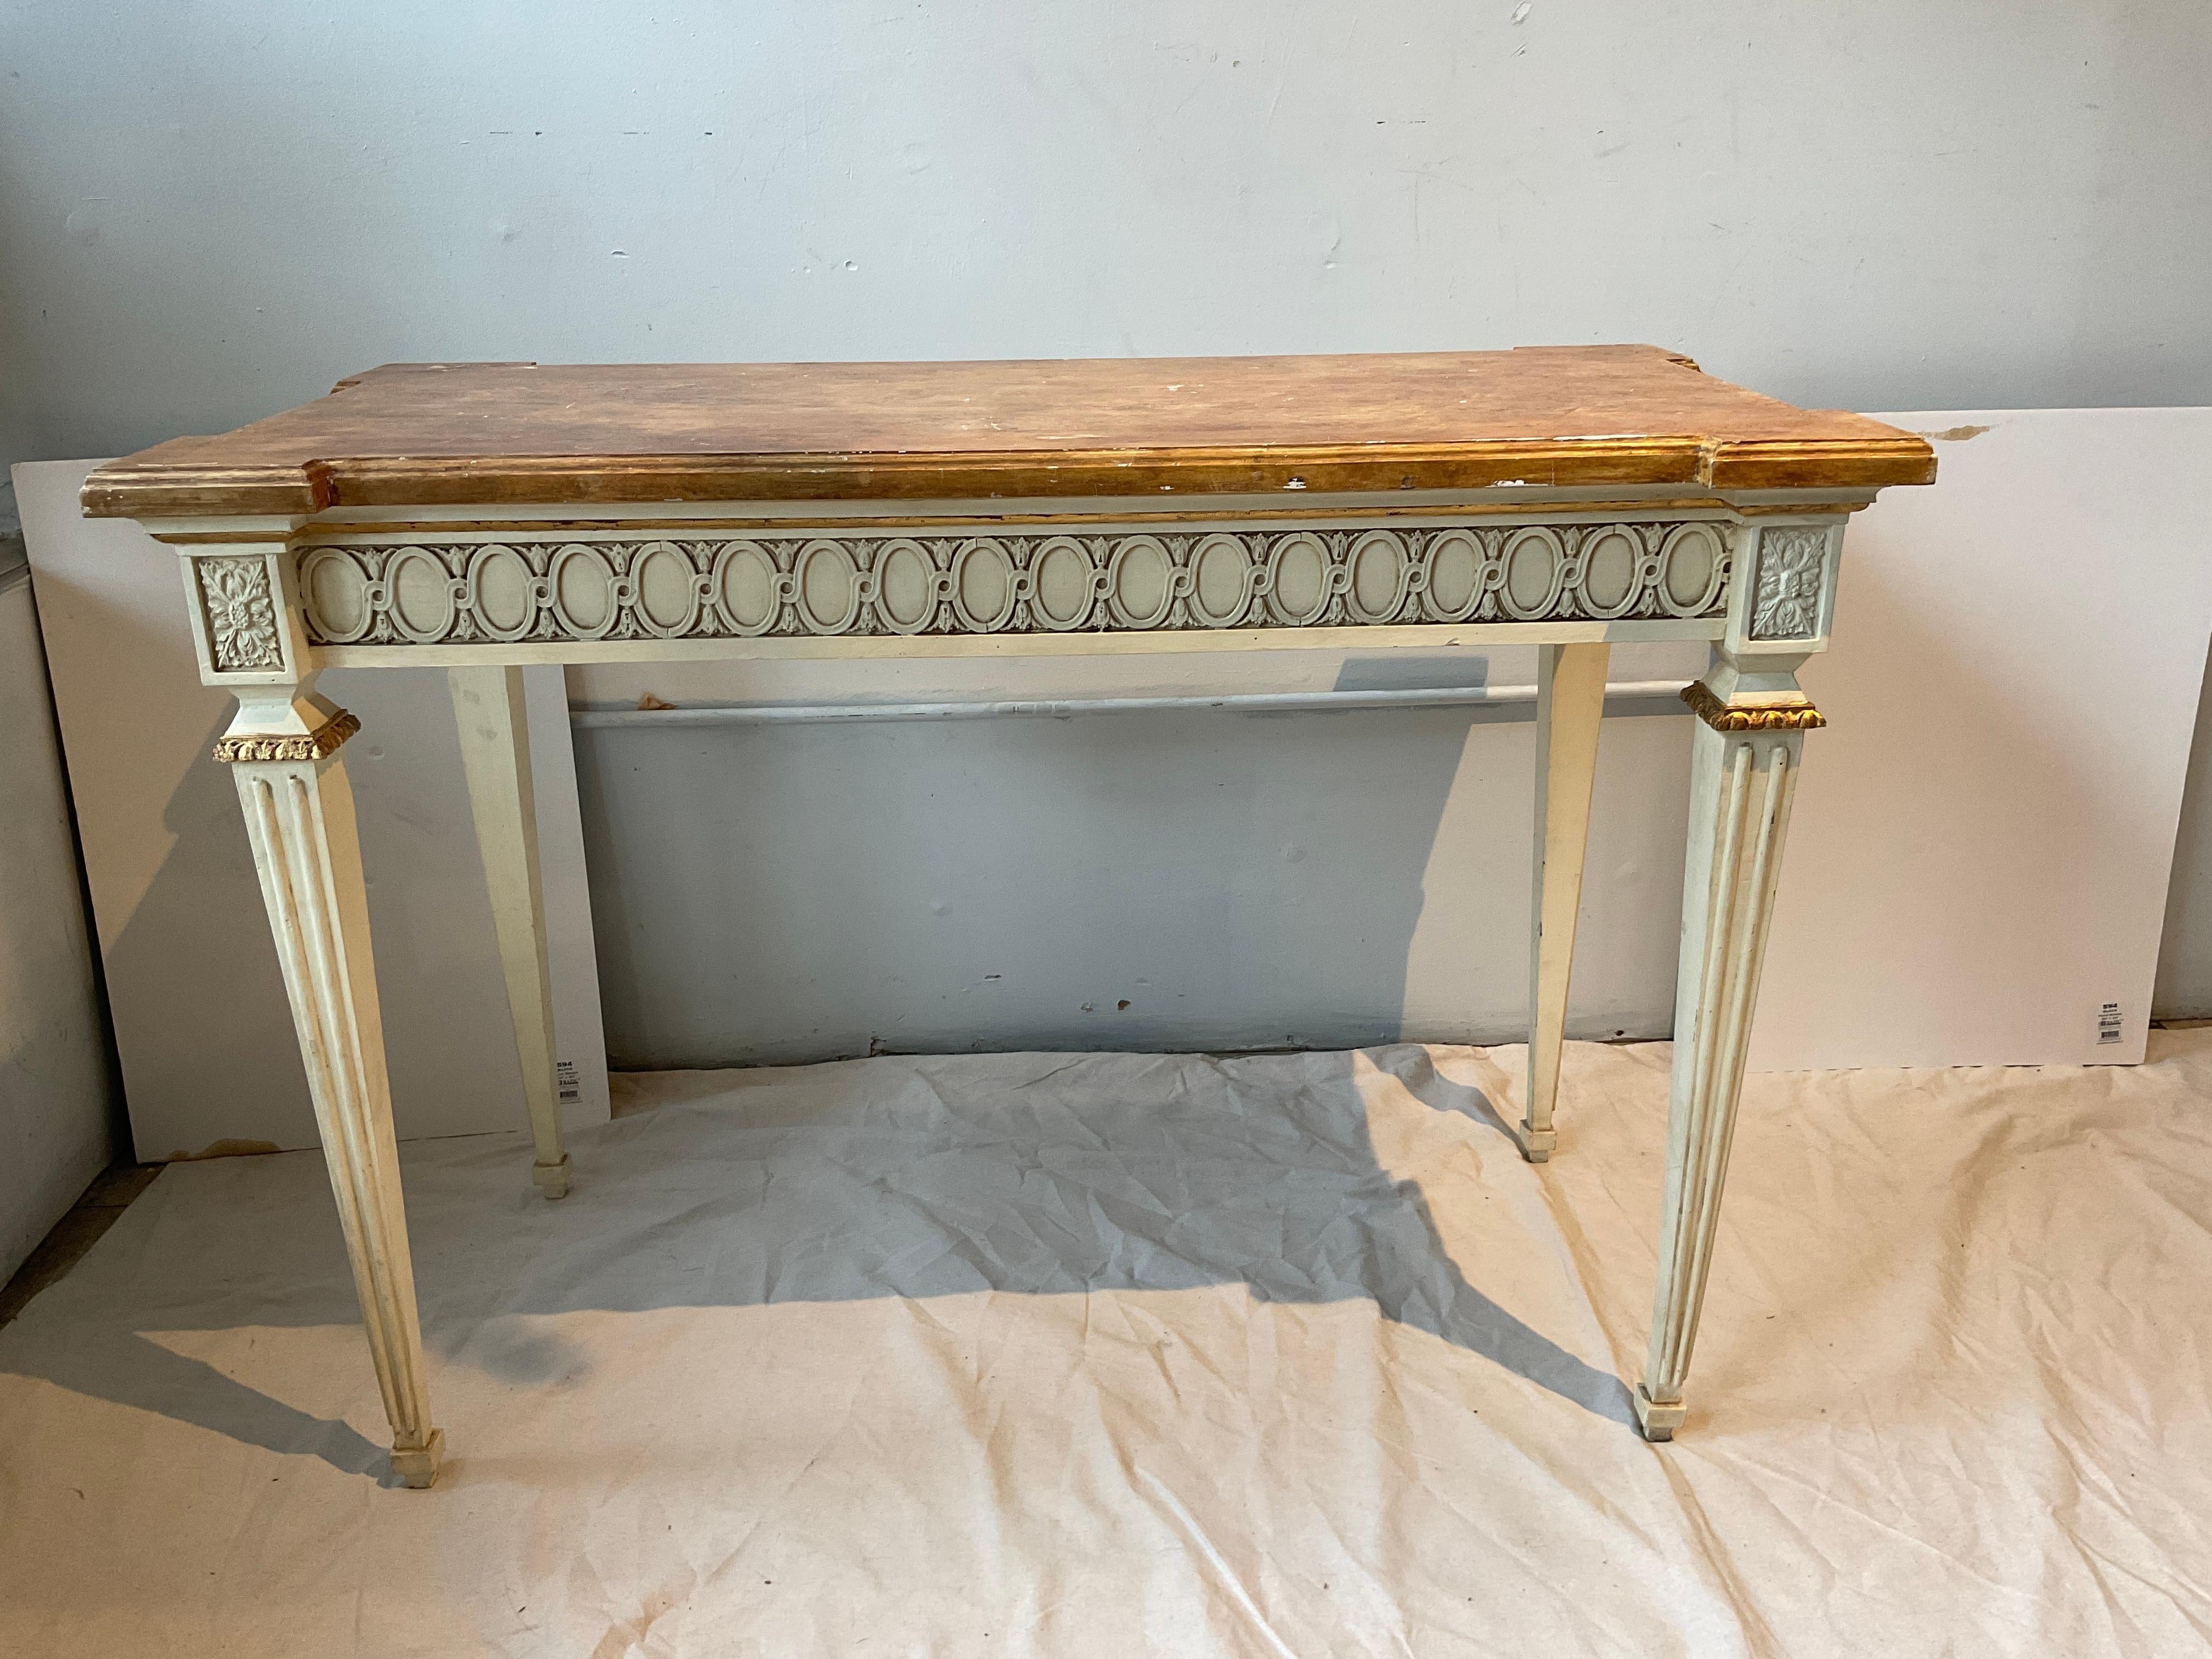 Painted wood French style Regency console. Faux finish top, gold accents.
Finish missing in places on top.